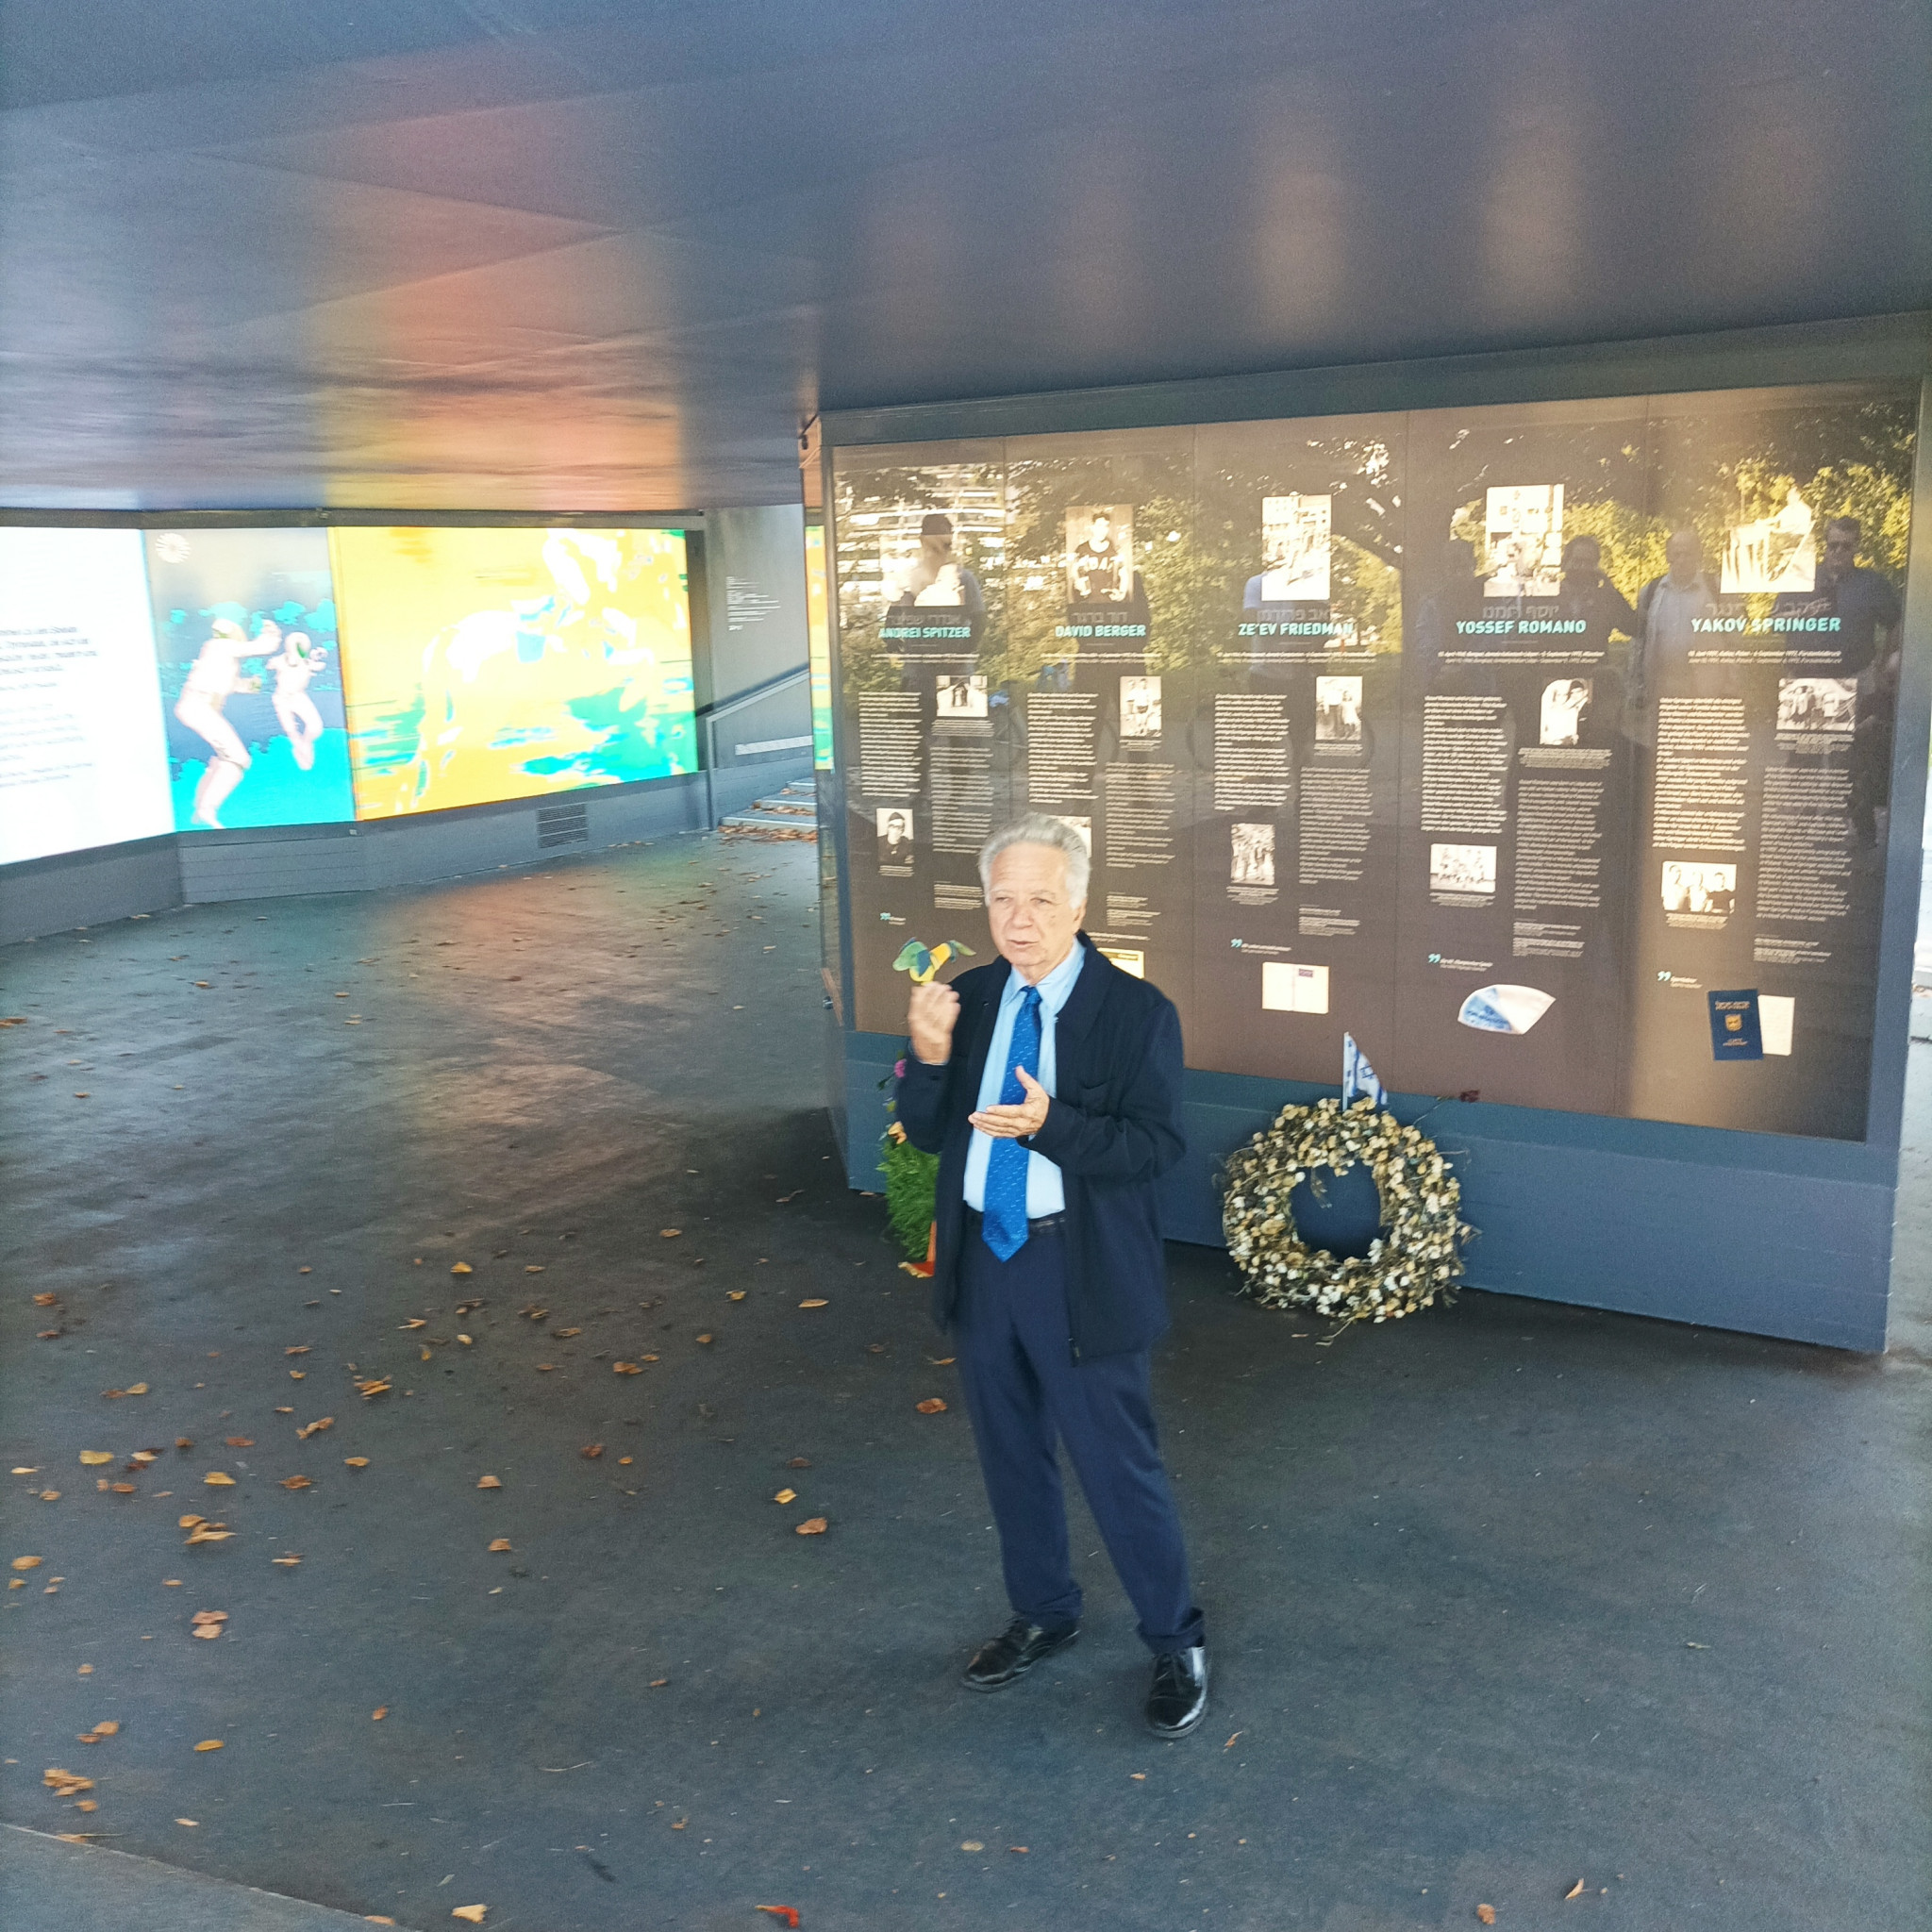 Author and Olympic historian David Wallechinsky speaking at the memorial in Munich's Olympic Park today  ©ITG